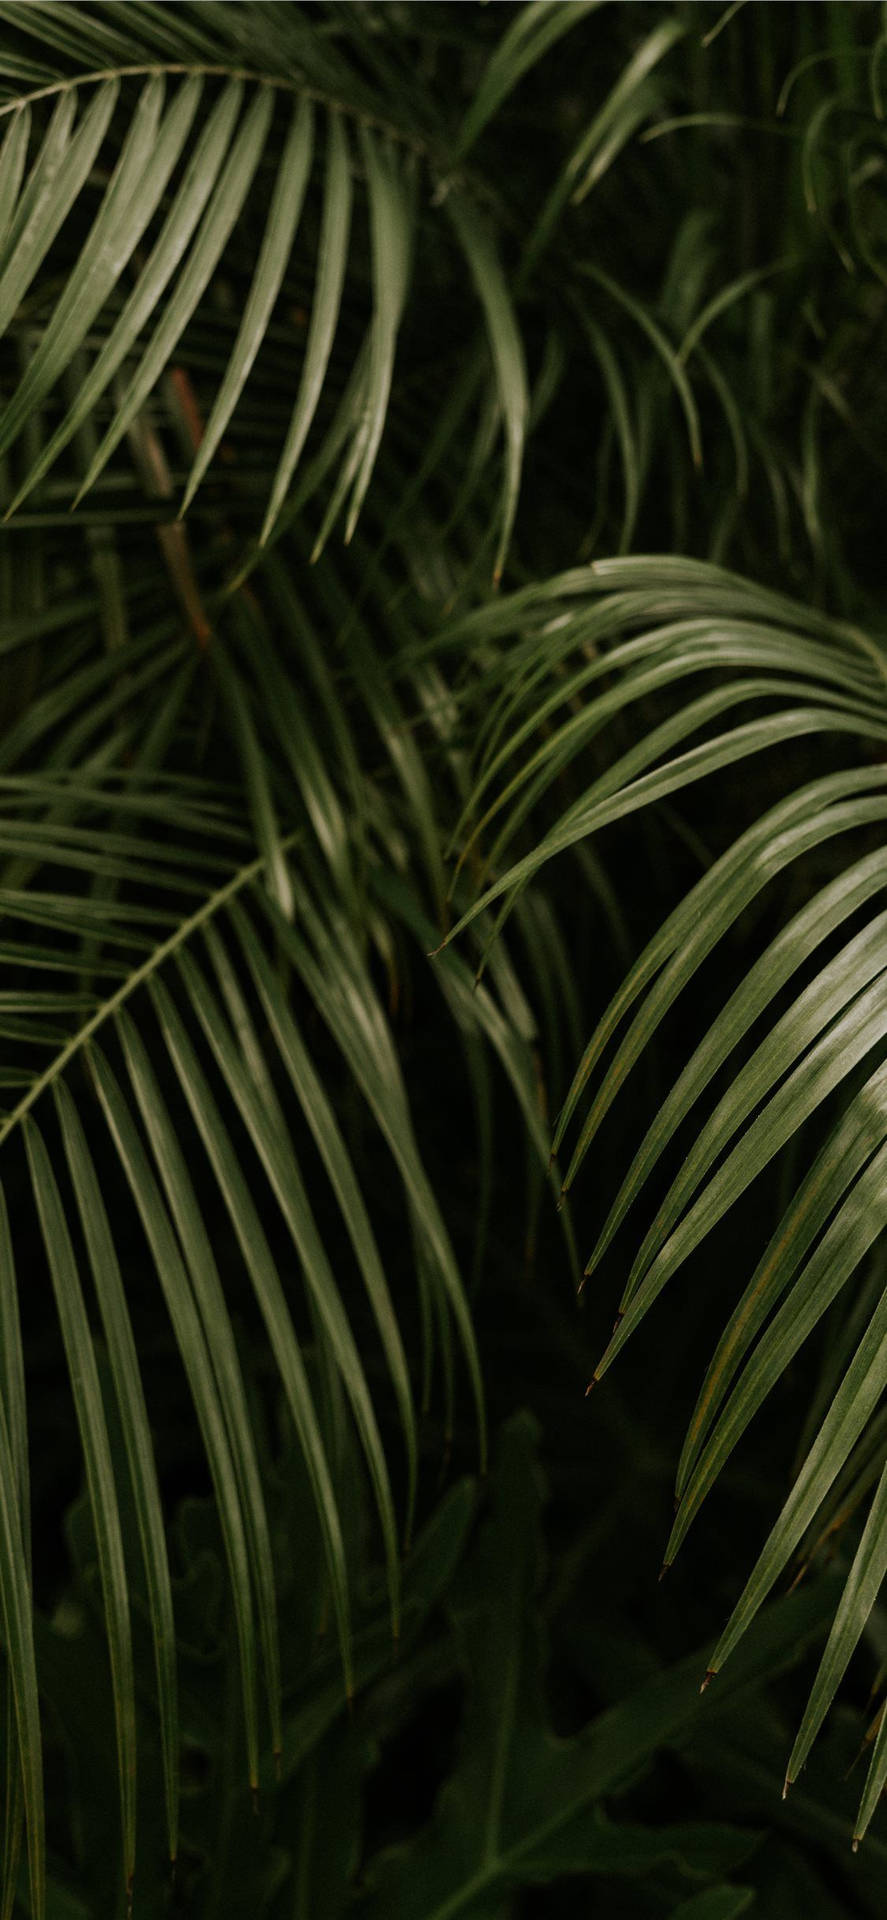 Palm Tree Leaves Iphone Wallpaper